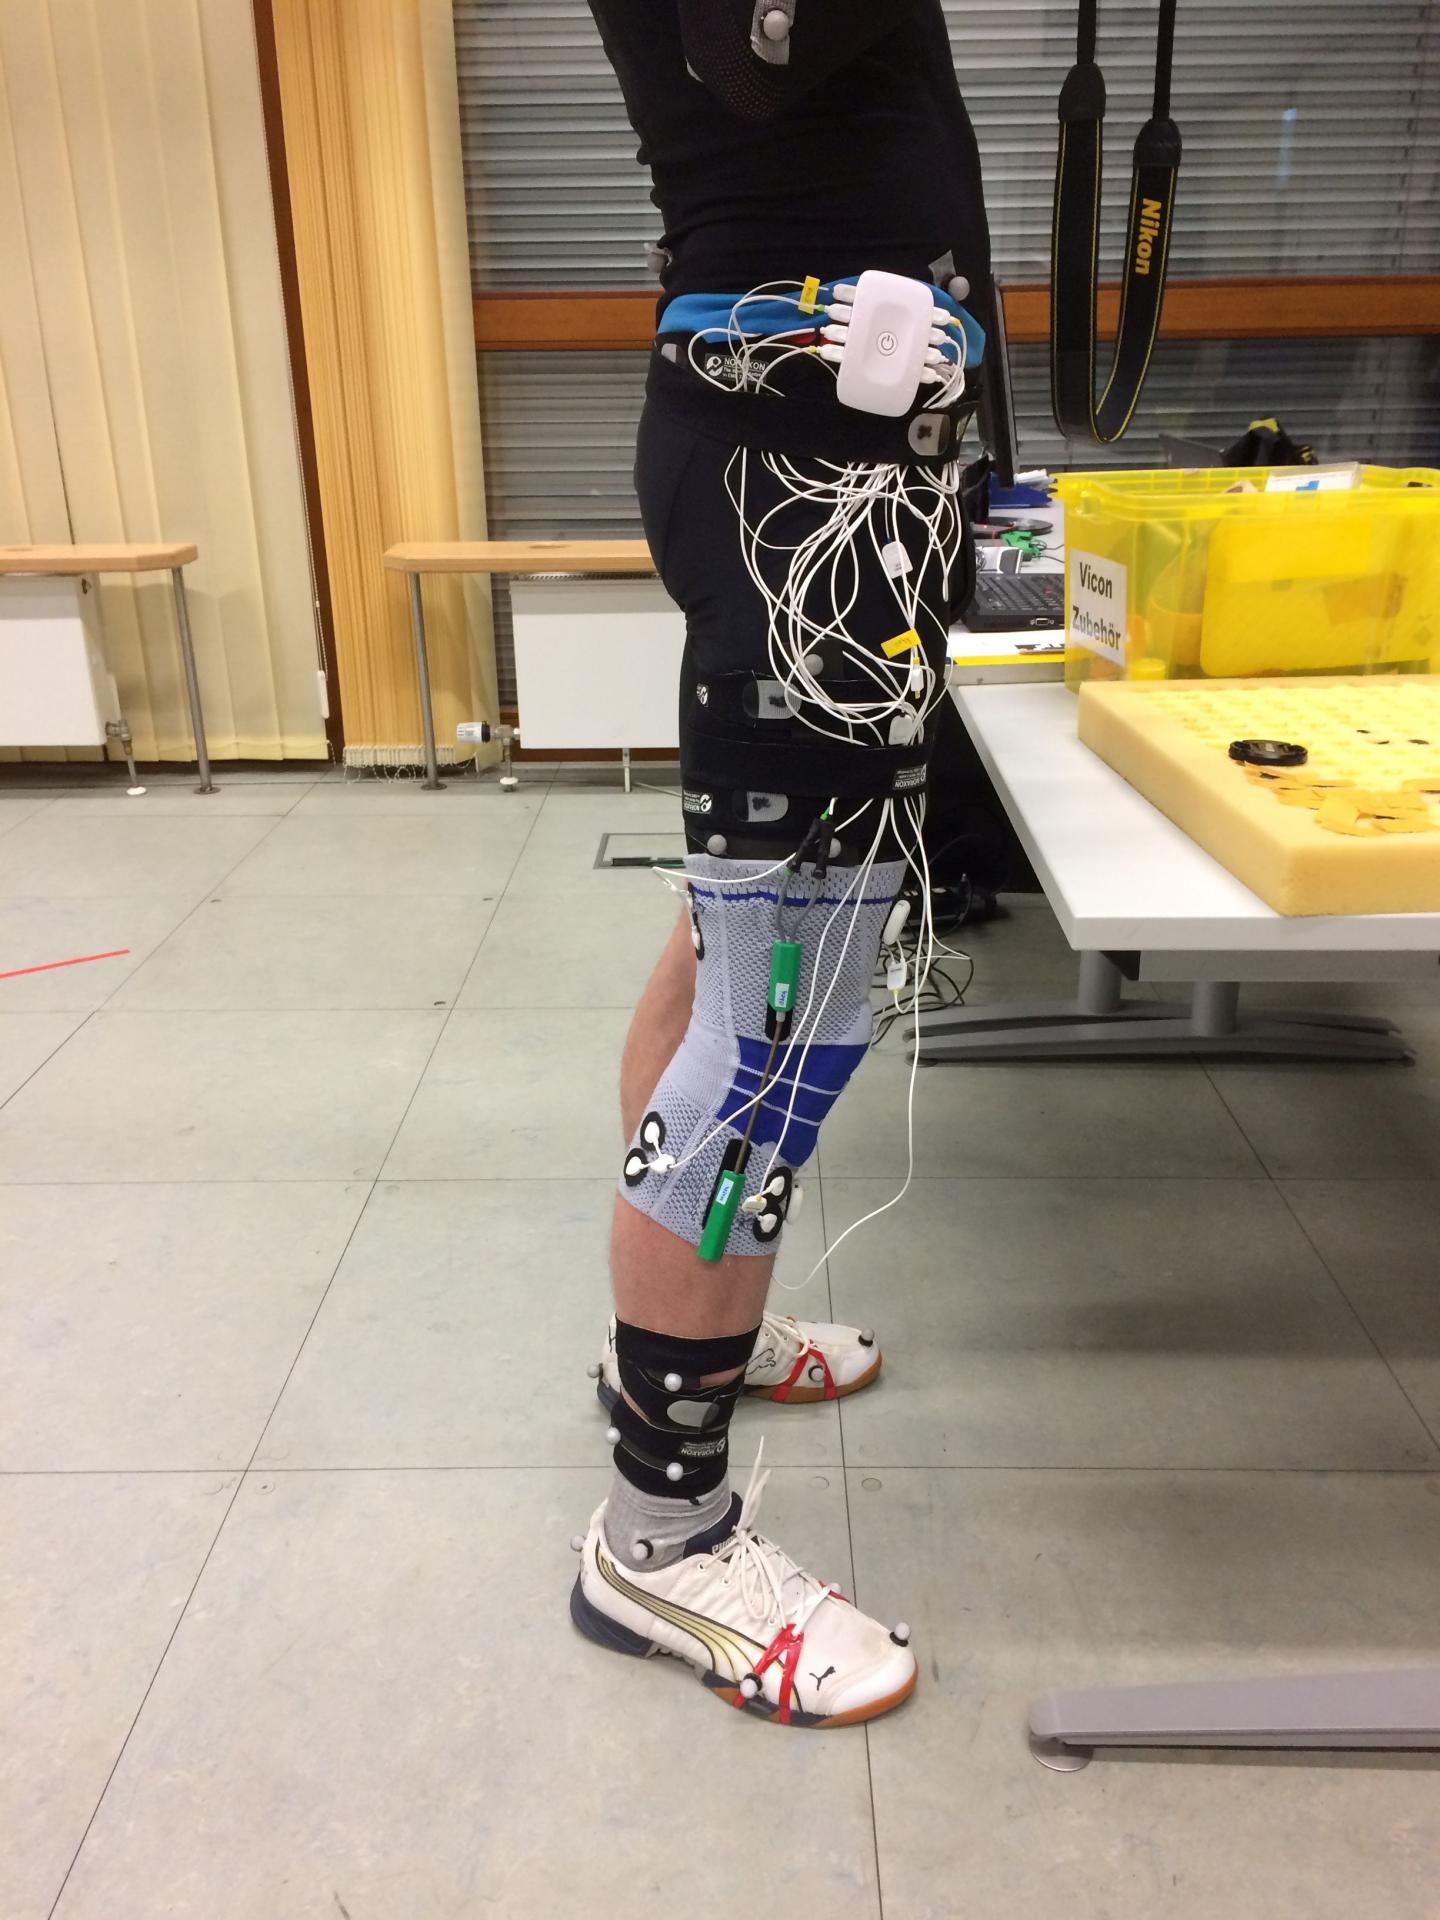 Mobile Sensors Measure the Movement of the Knee Joint